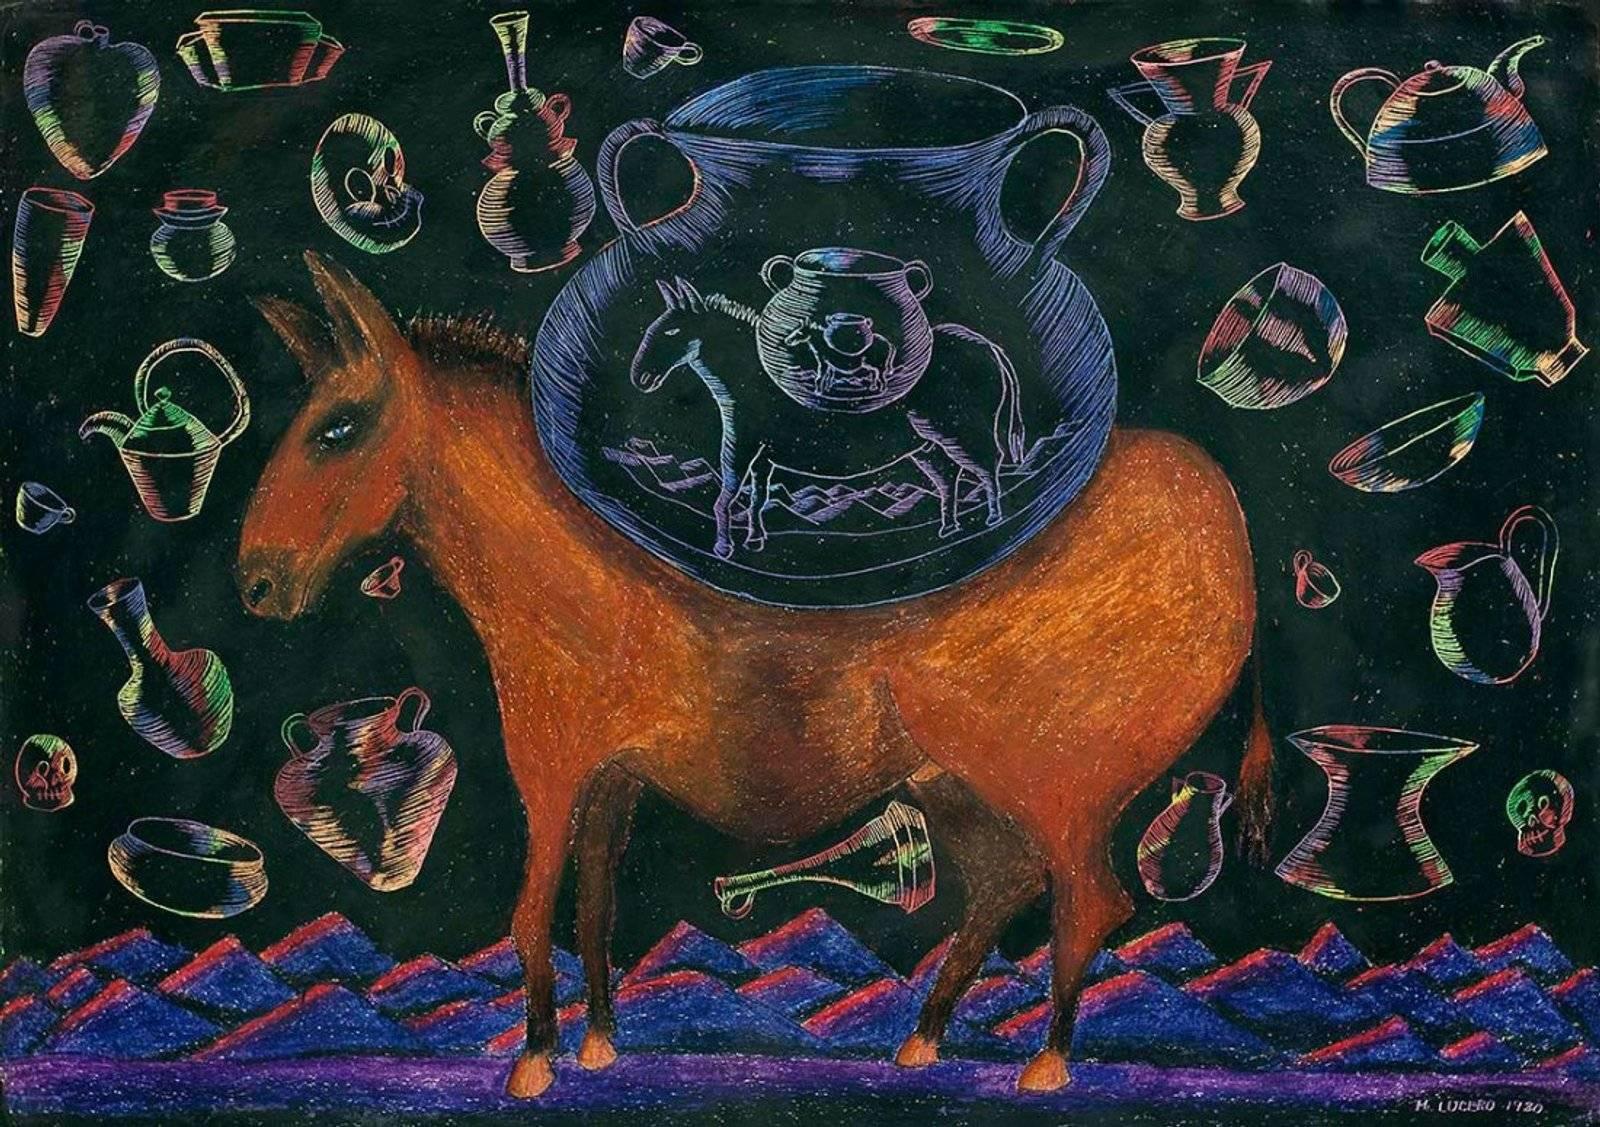 Michael Lucero Animal Art - Colored Drawing with Ceramics and Horse Pop Folk Art 1980s 